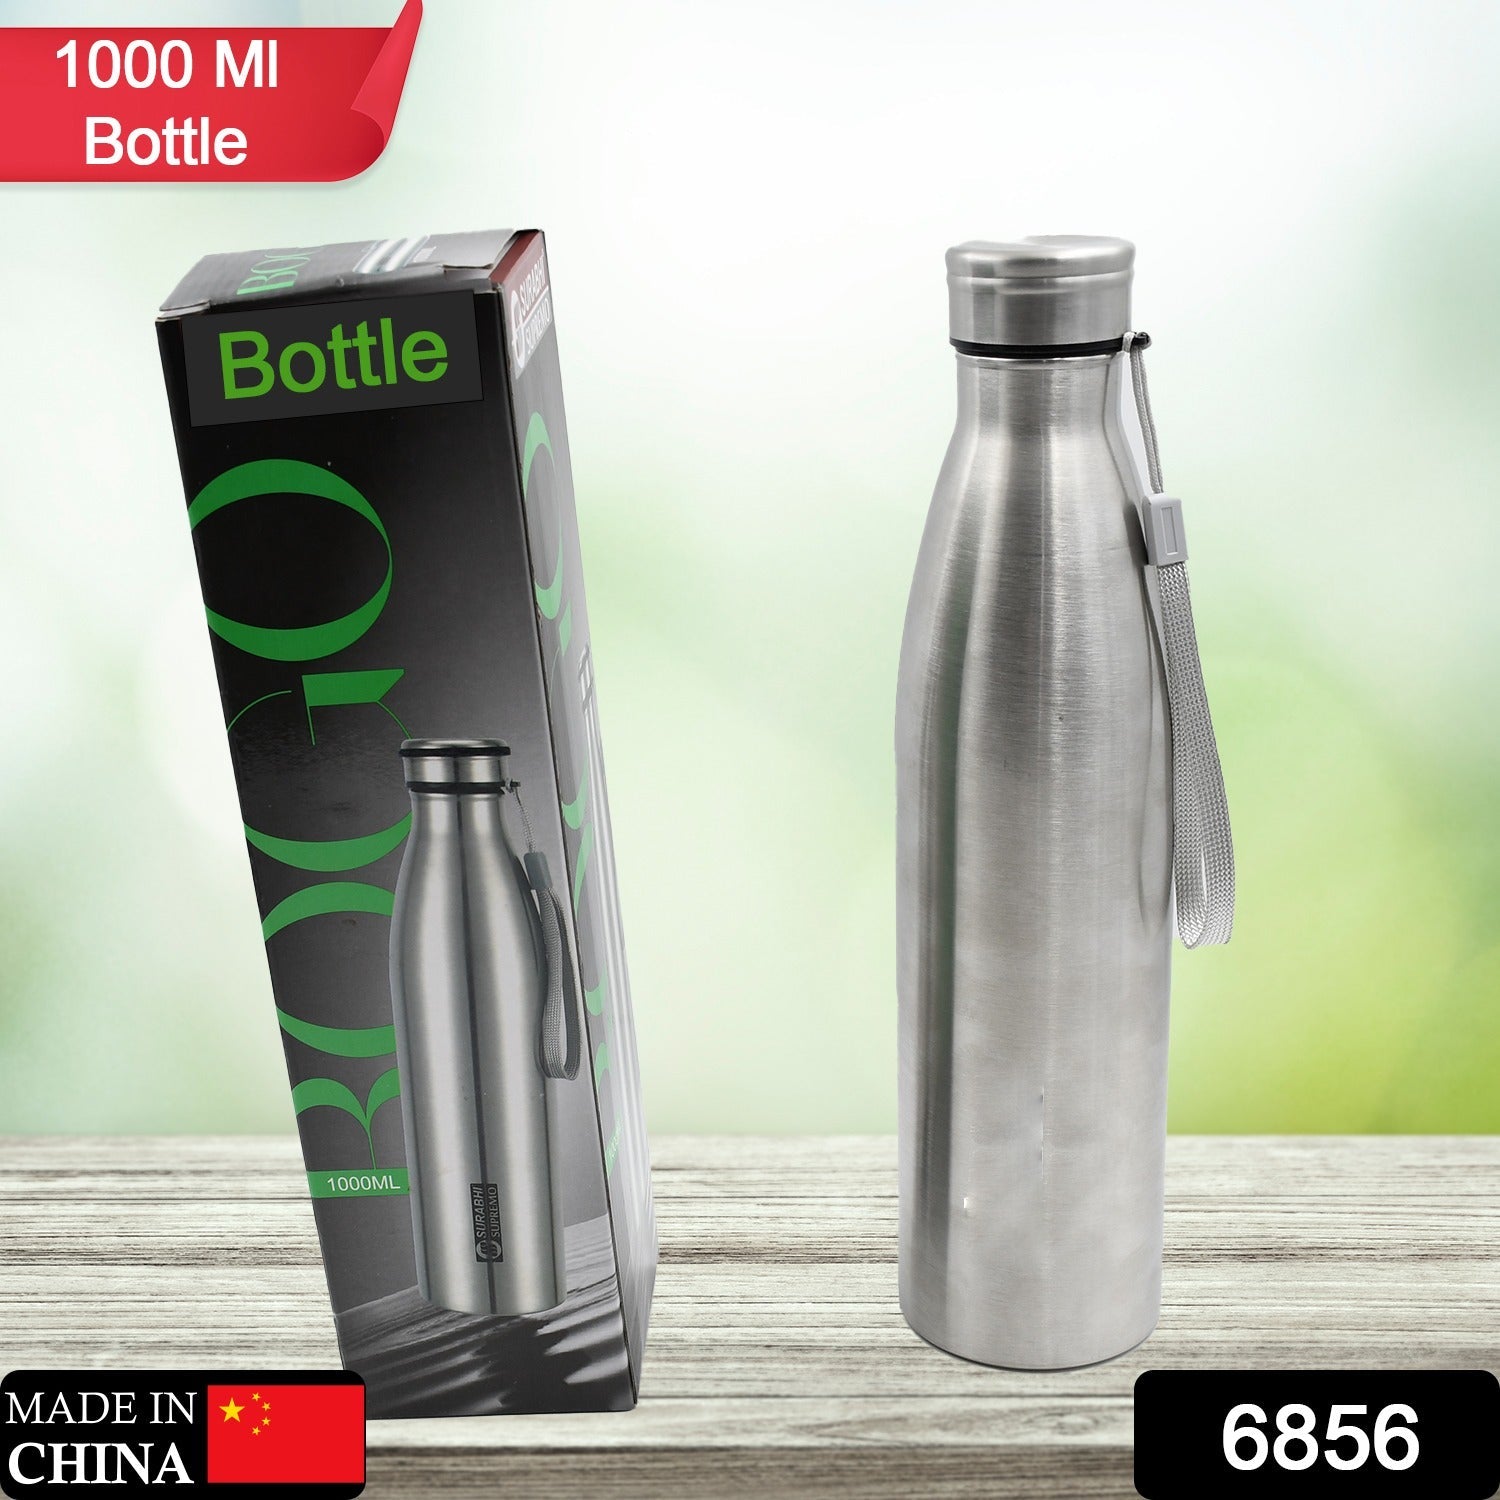 6856 Hot and Cold Water Bottle, Water Bottle for Office, Thermal Flask, Stainless Steel Water Bottles, Flasks for Tea Coffee, Hot & Cold Drinks, BPA Free, Leakproof, Portable For office/Gym/School 1000 ML